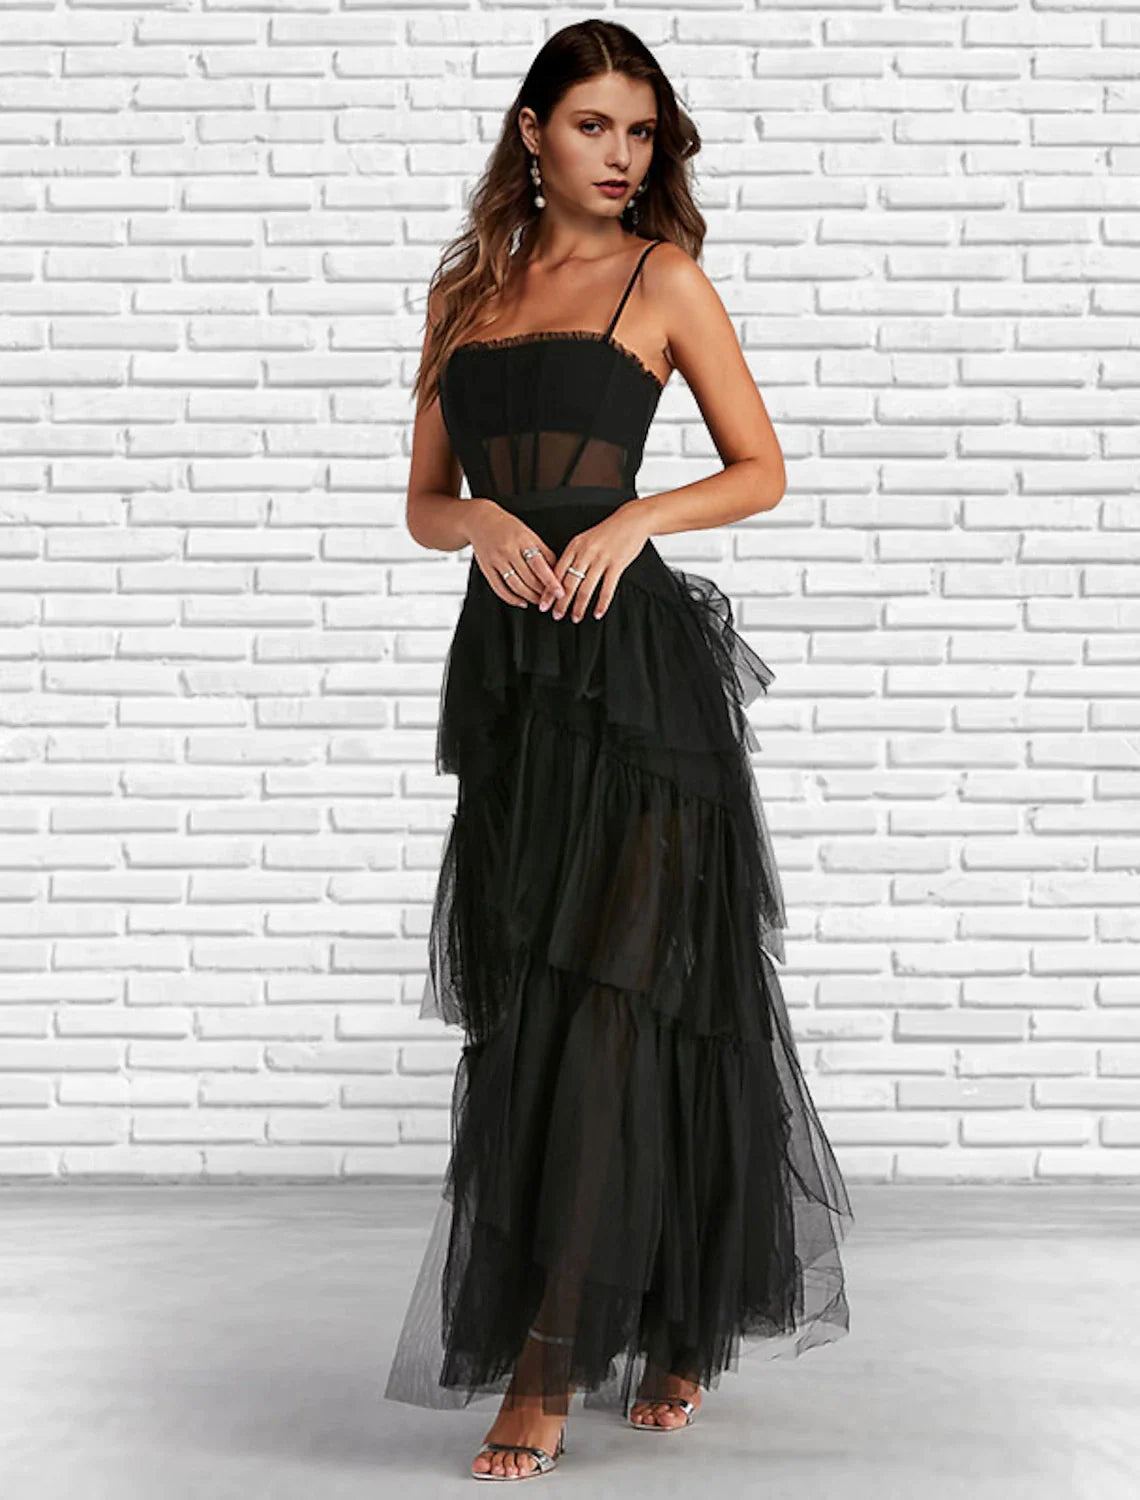 A-Line Prom Dresses Corsets Dress Party Wear Ankle Length Sleeveless Strapless Tulle Ladder Back with Ruffles